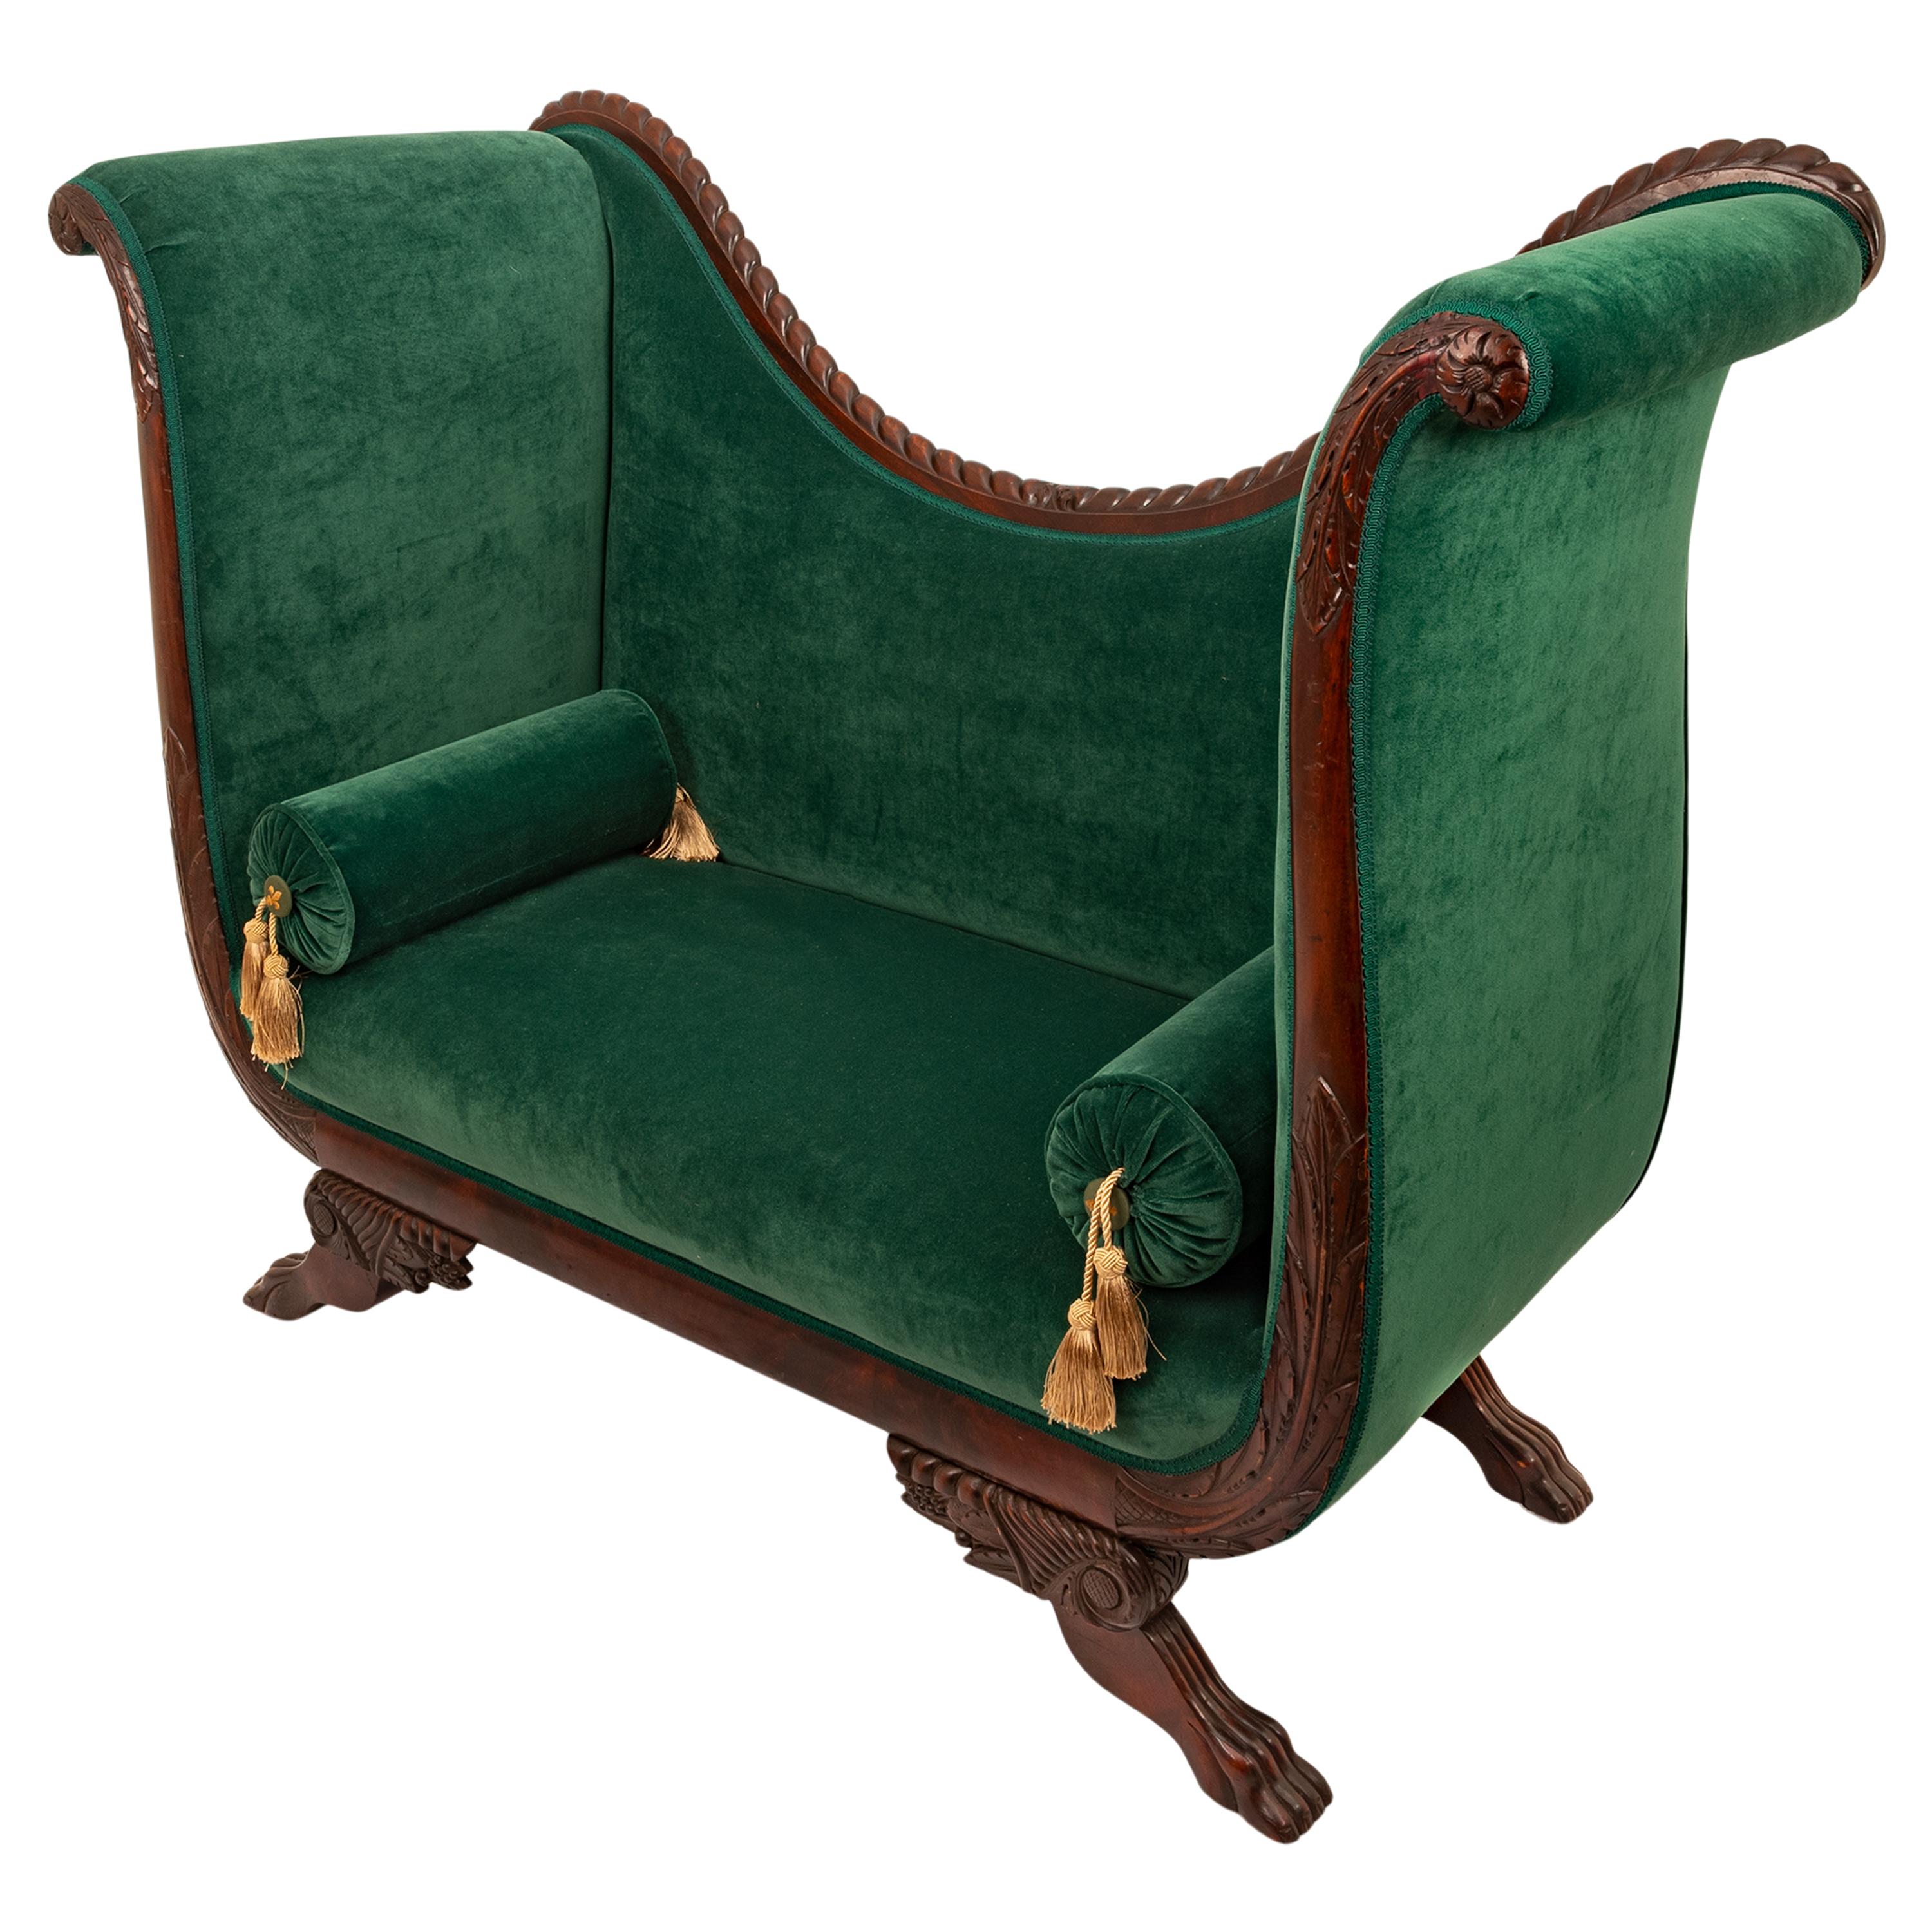 A fine antique Federal Empire period carved flame mahogany high back / arm loveseat sofa, circa 1815, Mid Atlantic States, New York or Baltimore.
The sofa has just been professionally re-upholstered in a very high quality green velvet, the sofa